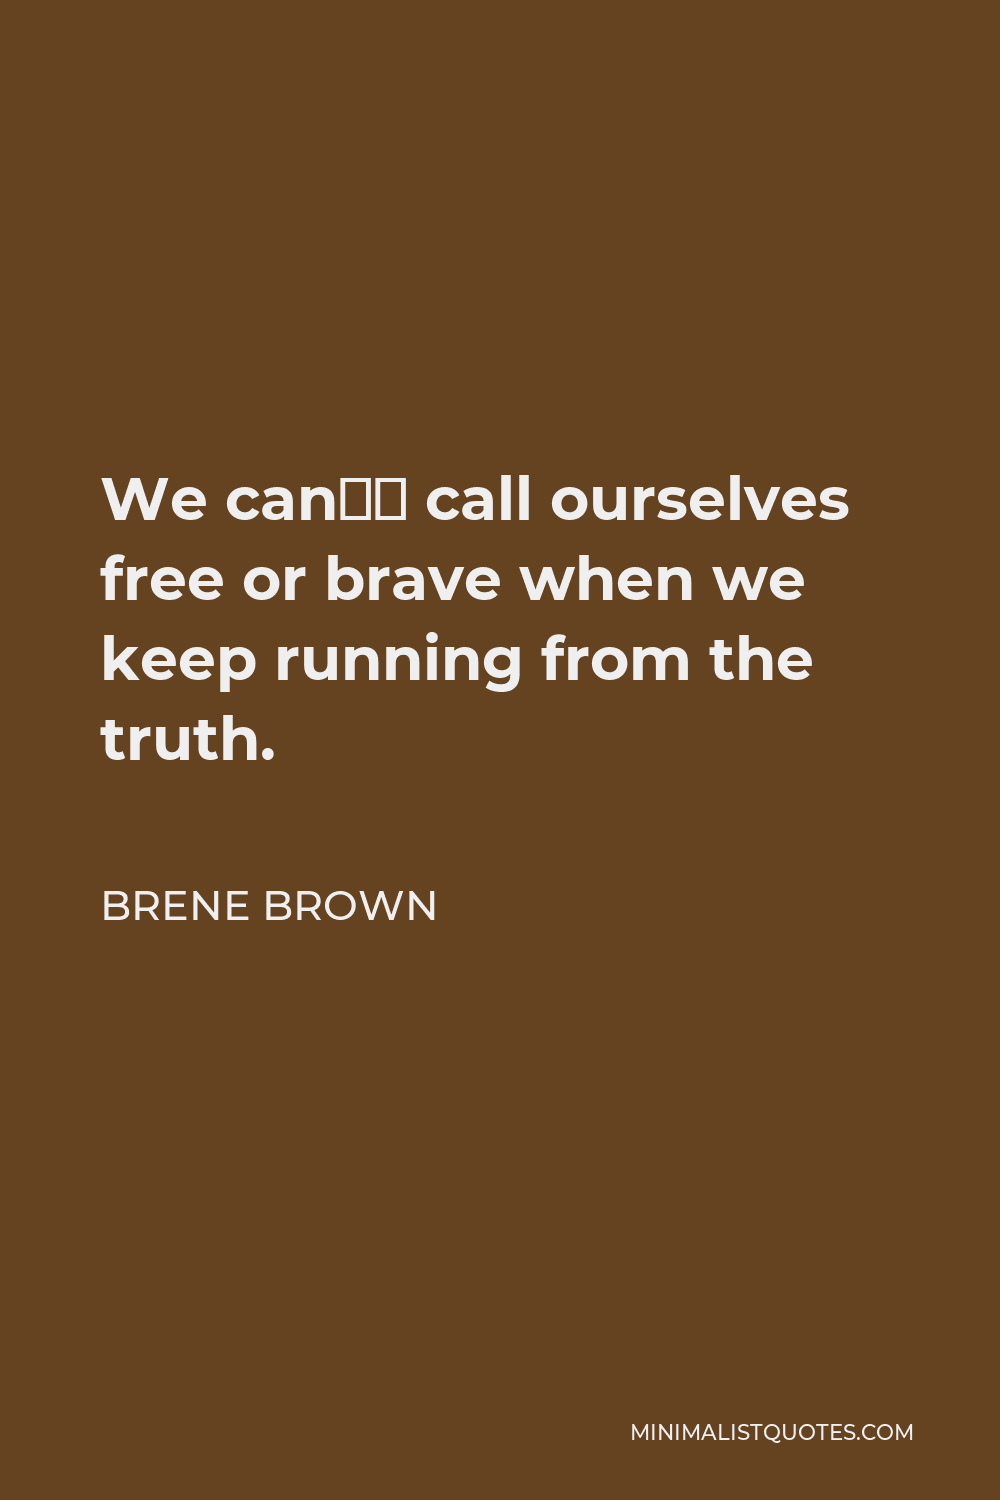 Brene Brown Quote - We can’t call ourselves free or brave when we keep running from the truth.